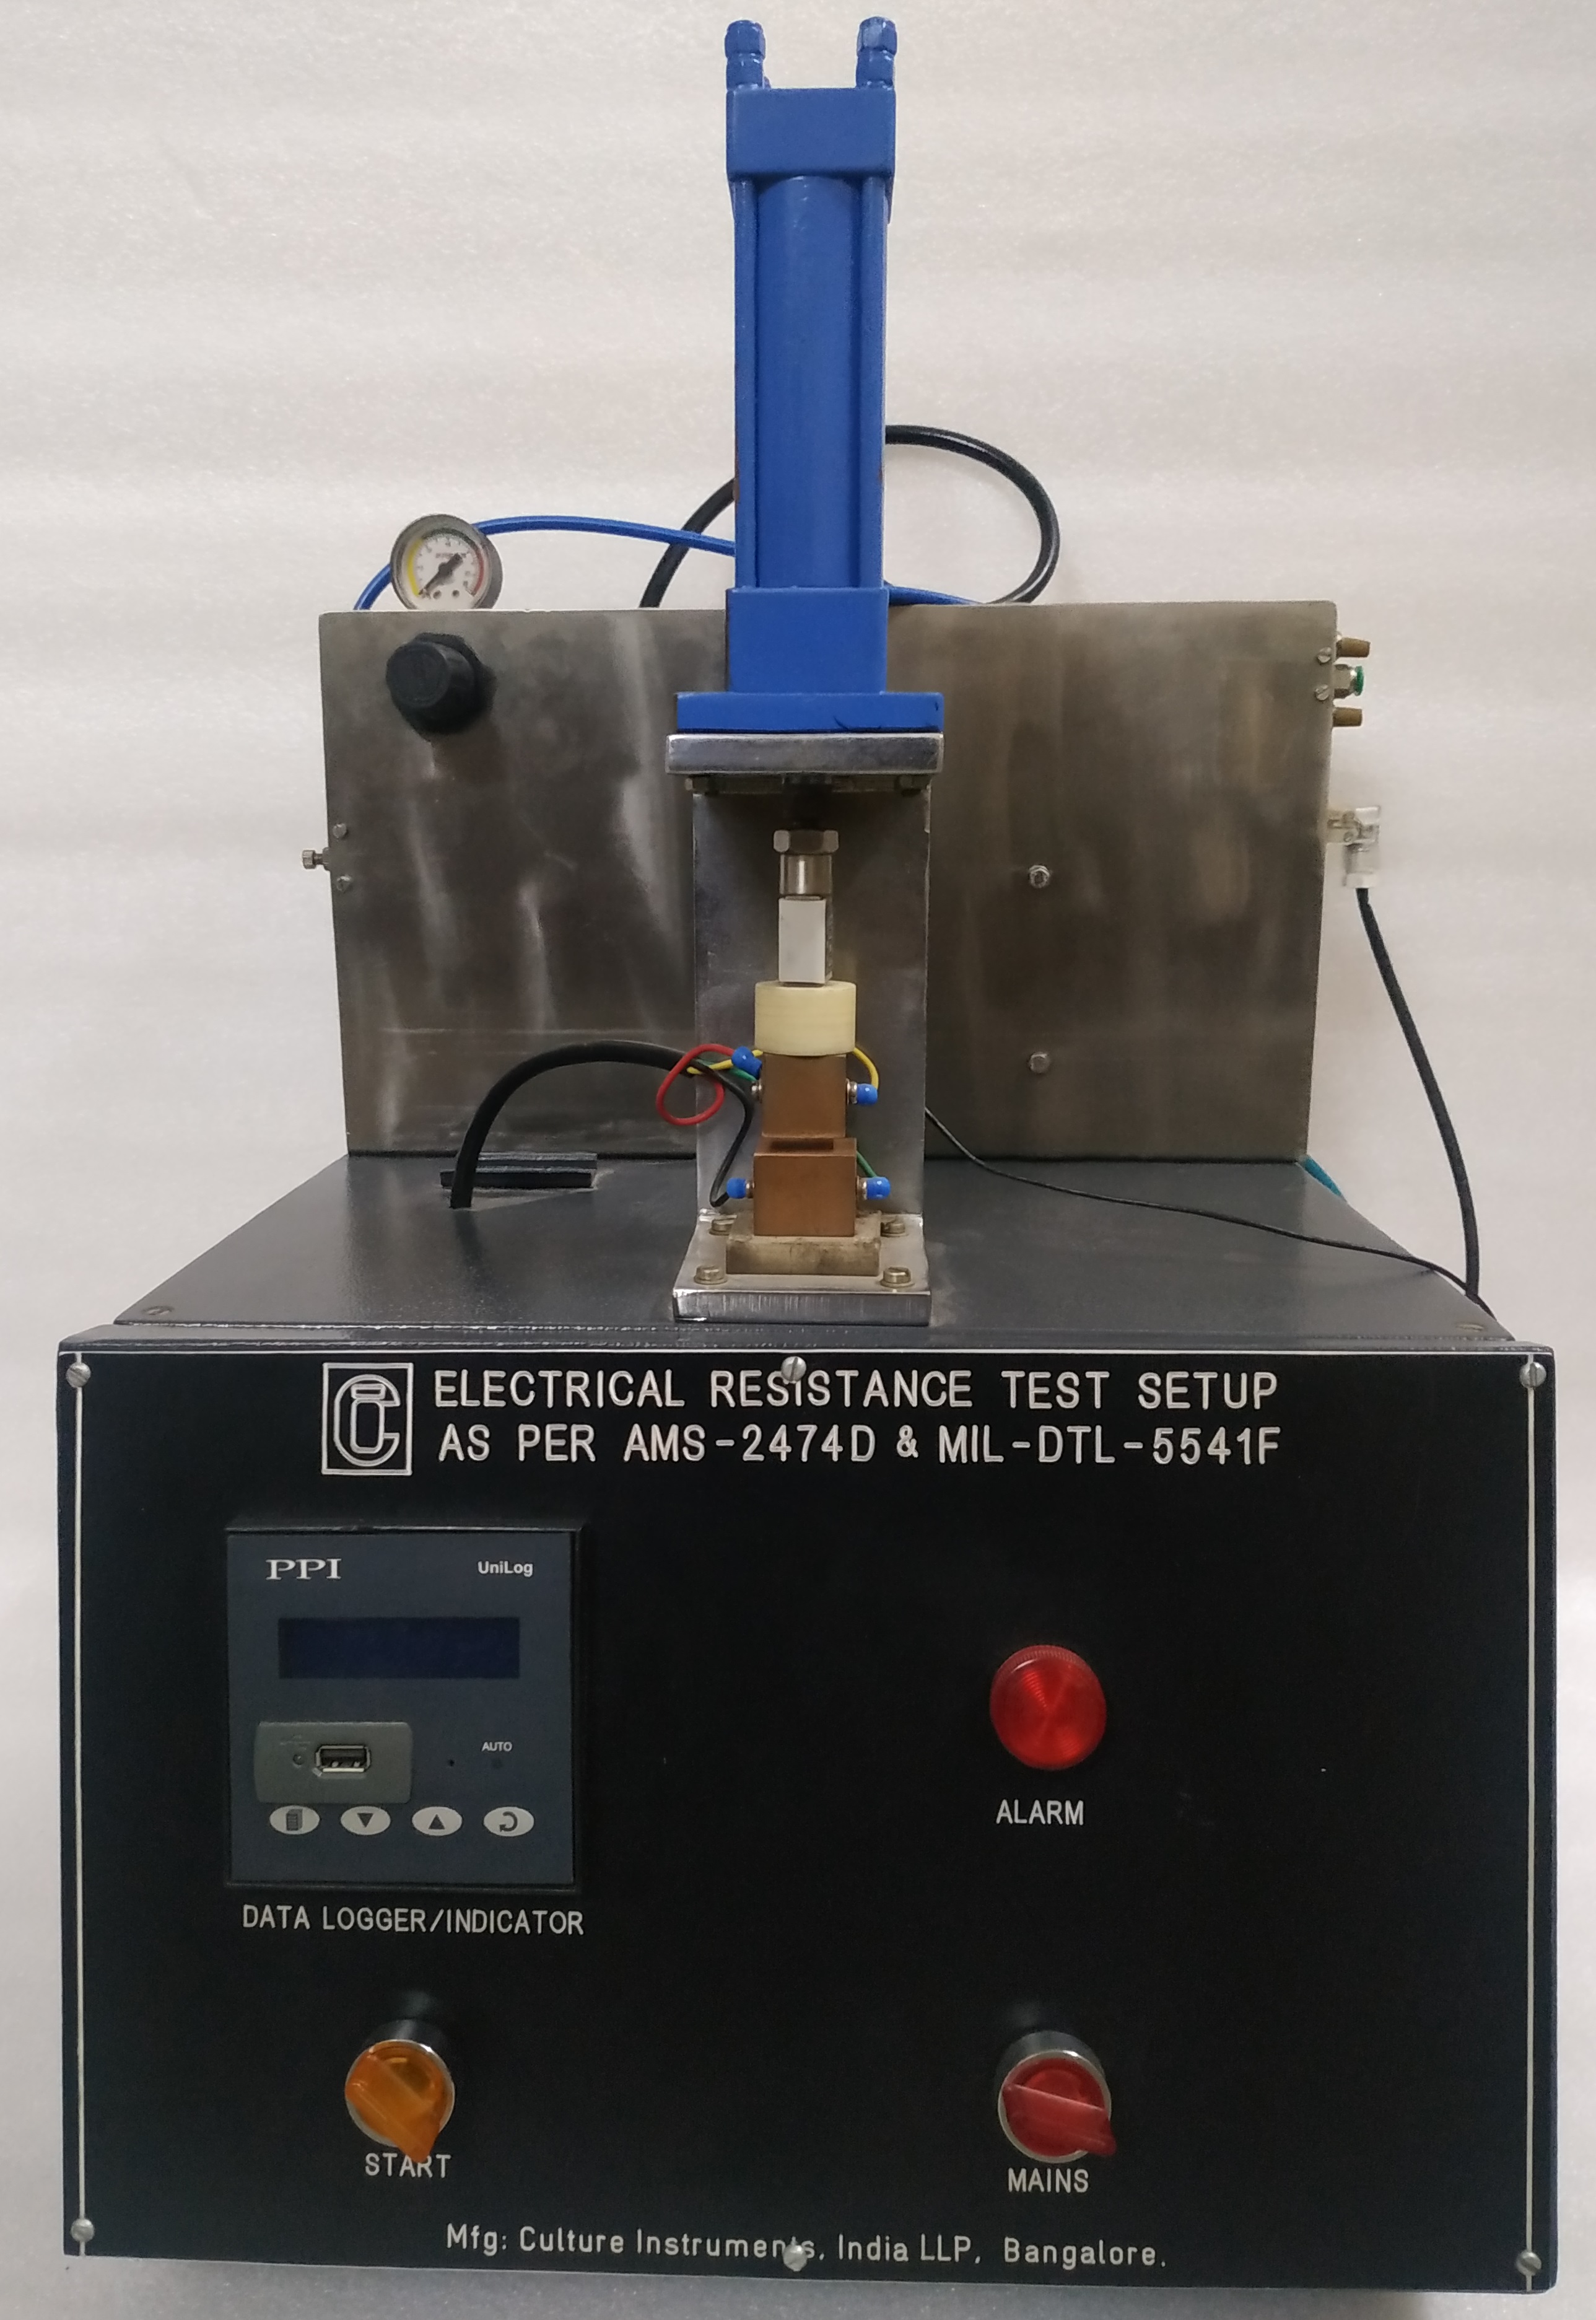 ELECTRICAL RESISTANCE TEST RIG